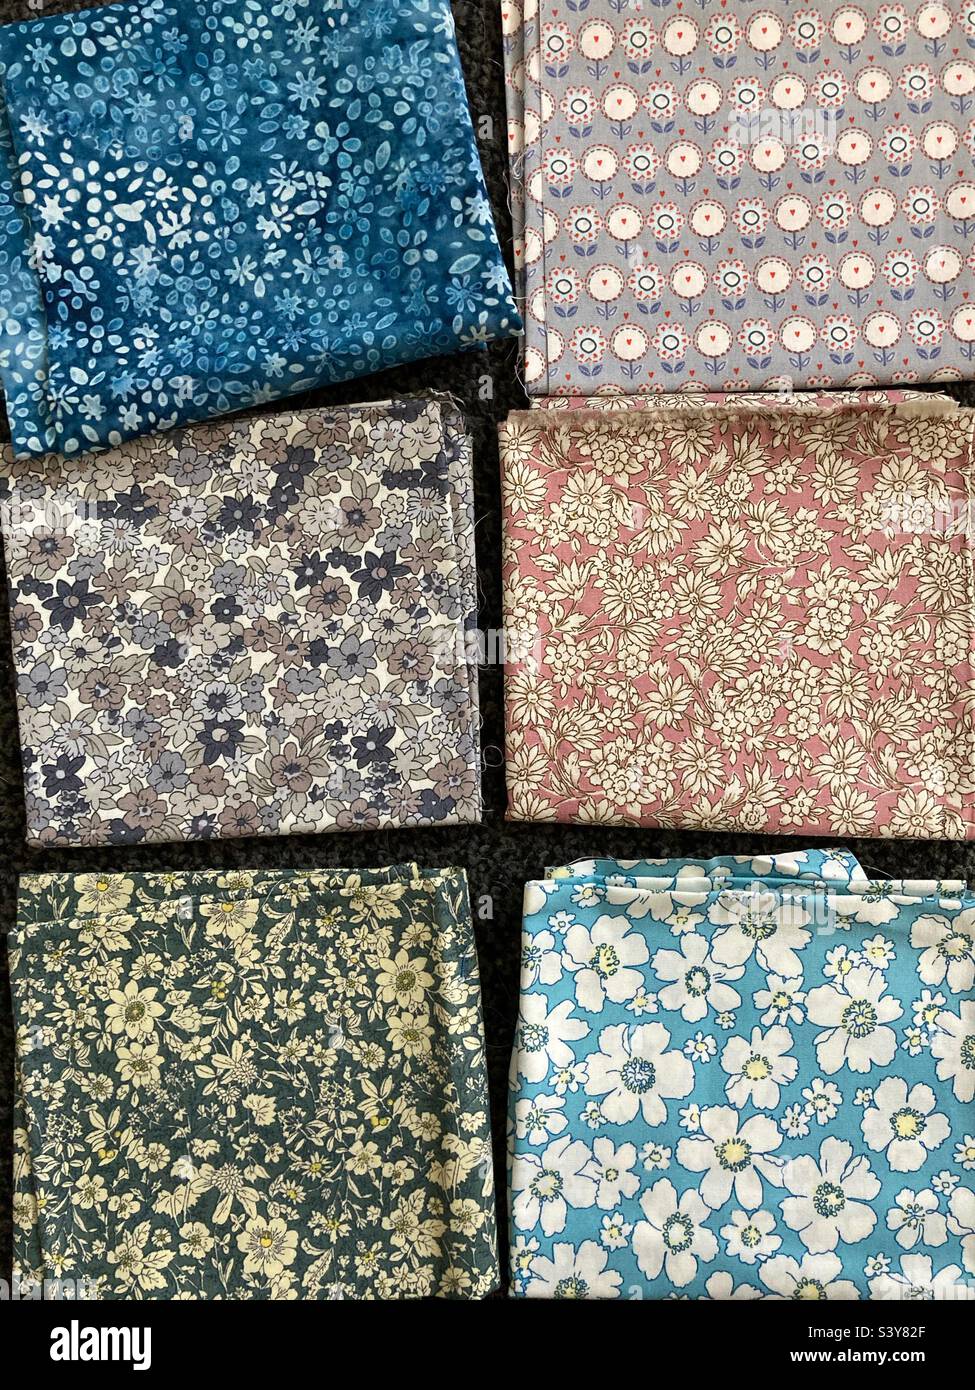 Flower patterned fabric Stock Photo